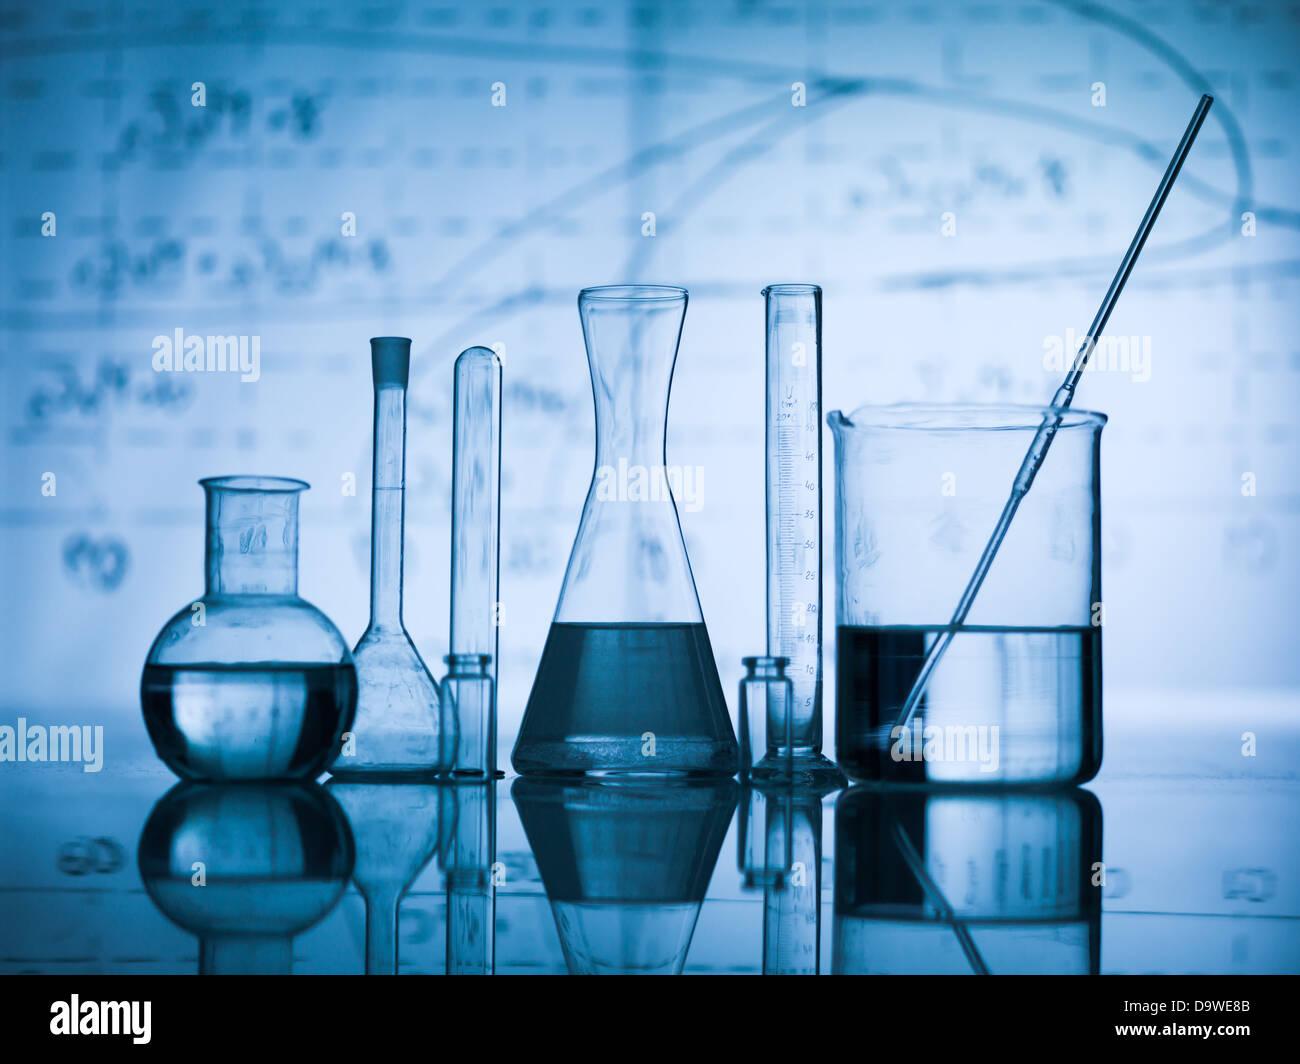 Group of laboratory flasks empty or filled with a clear liquid on blue tint scientific graphics background and their reflection Stock Photo